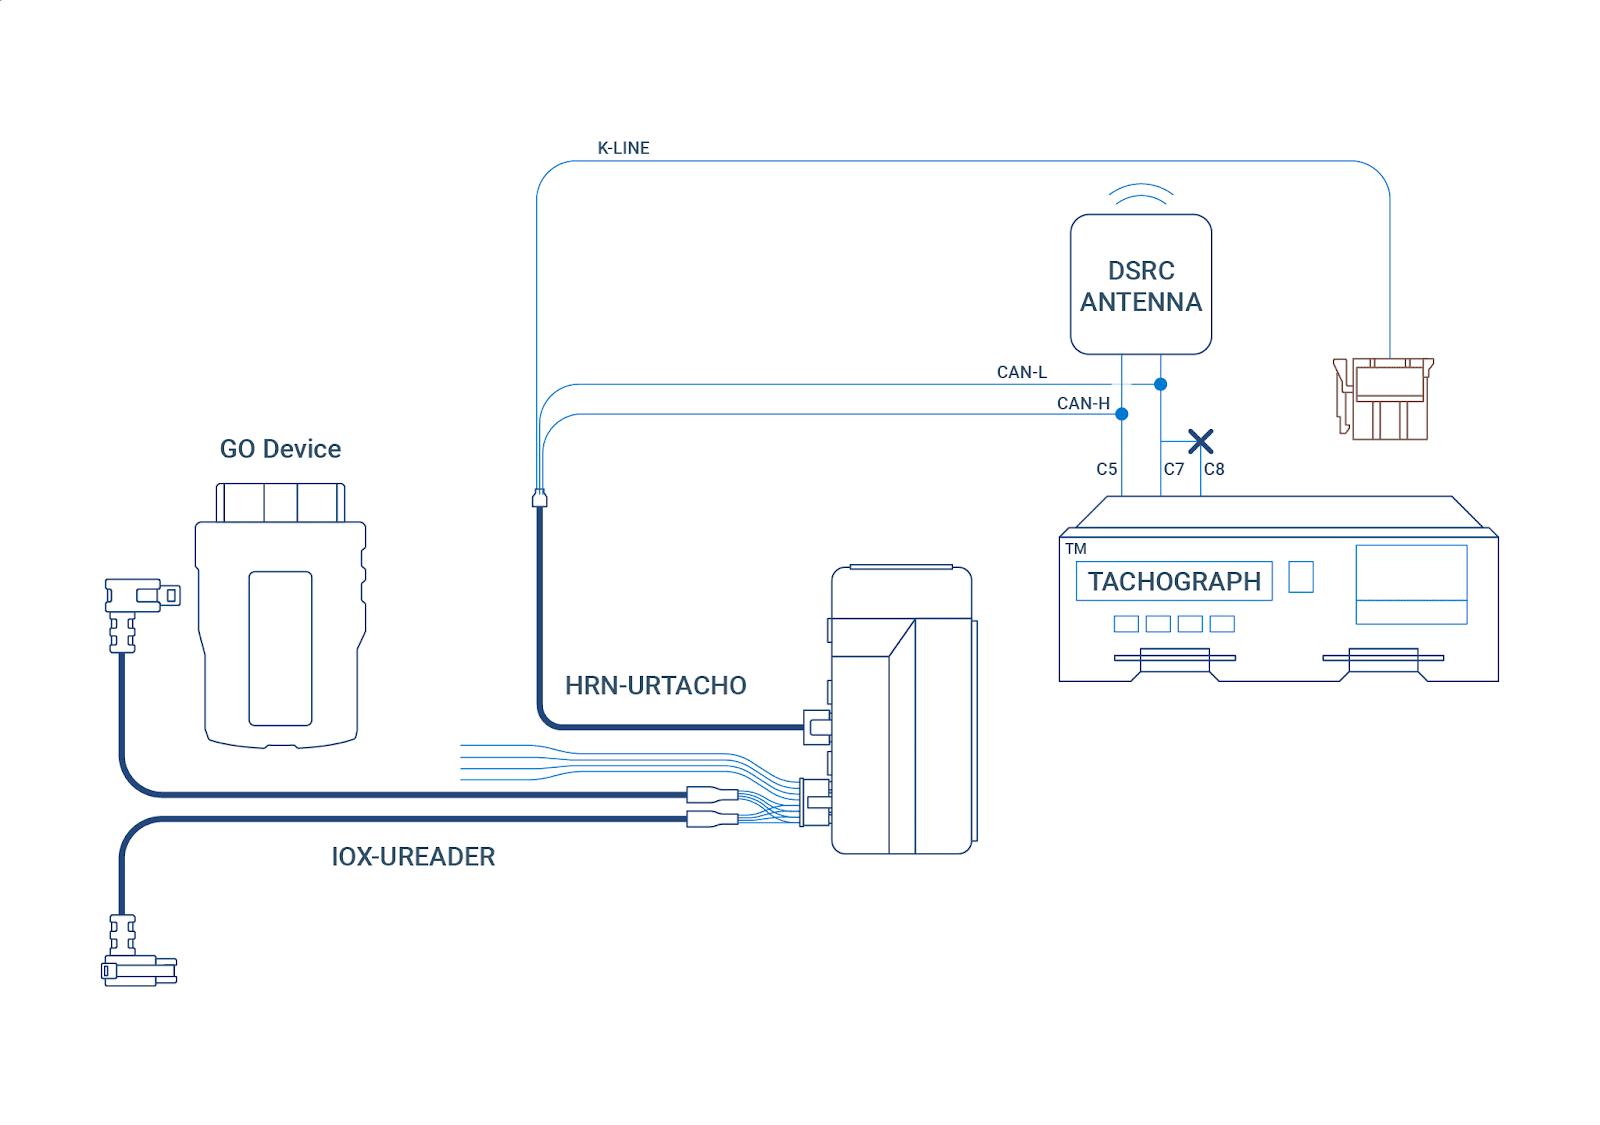 Diagram of communication between GO device, tachograph, and IOX-READER